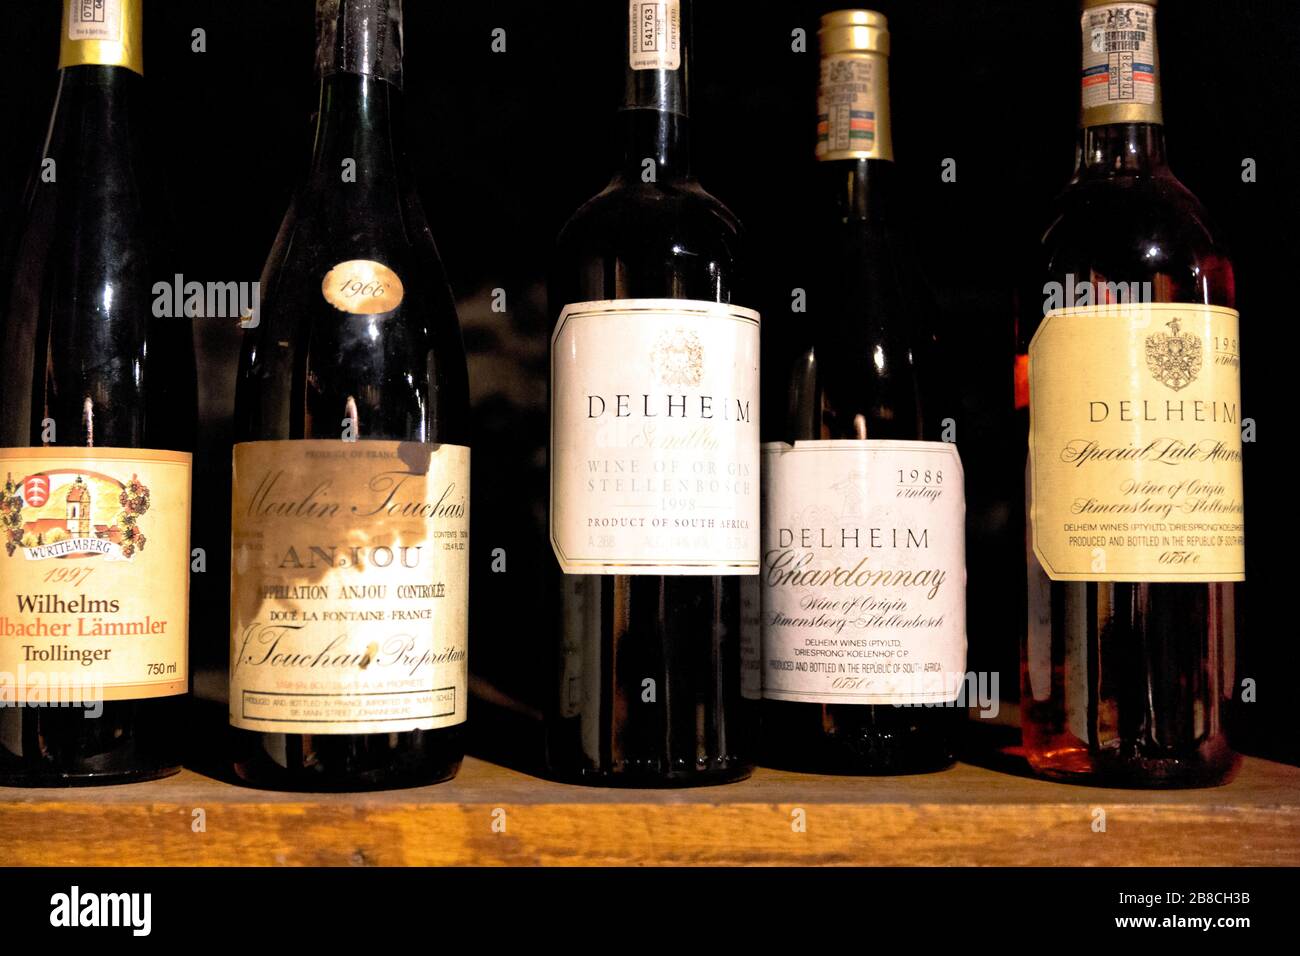 A row of rare vintage bottles of wine on display at the Delheim wine estate in Stellenbosch, South Africa Stock Photo